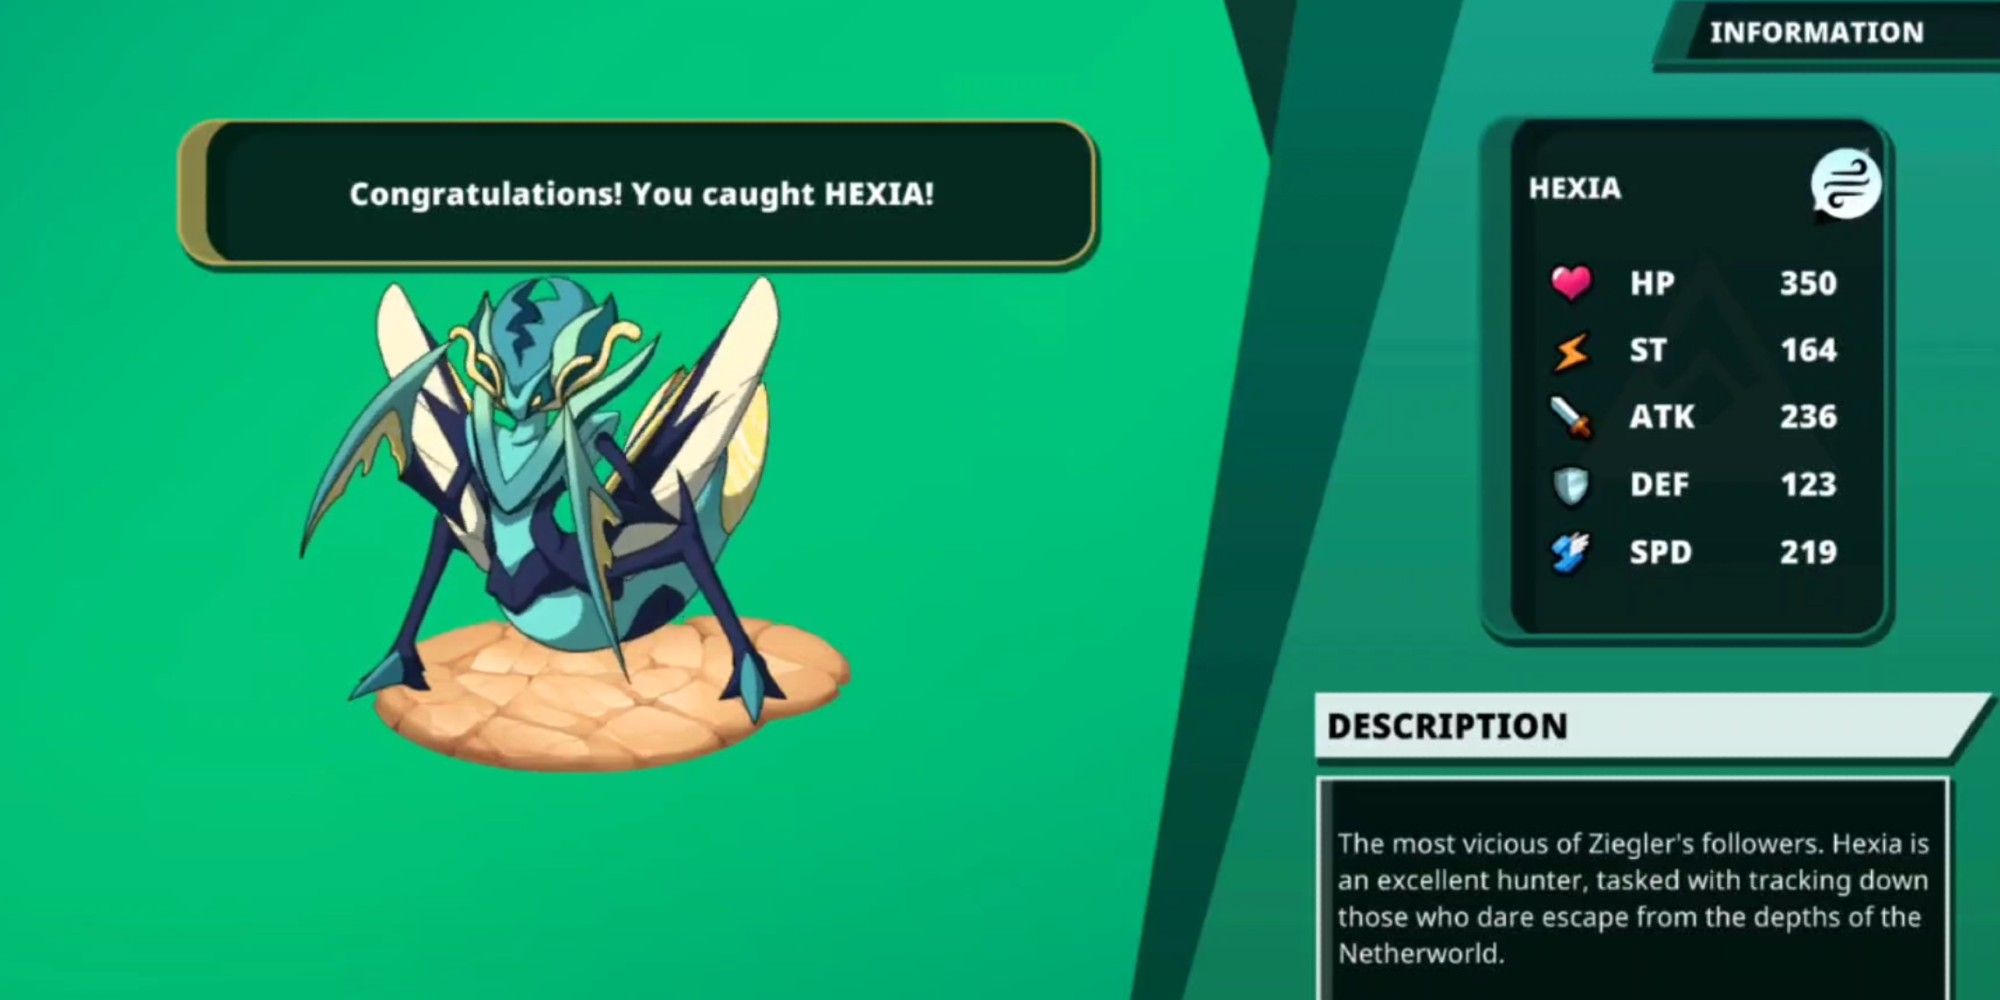 Nexomon: Extinction Hexia capoture screen with stats on the right, green background